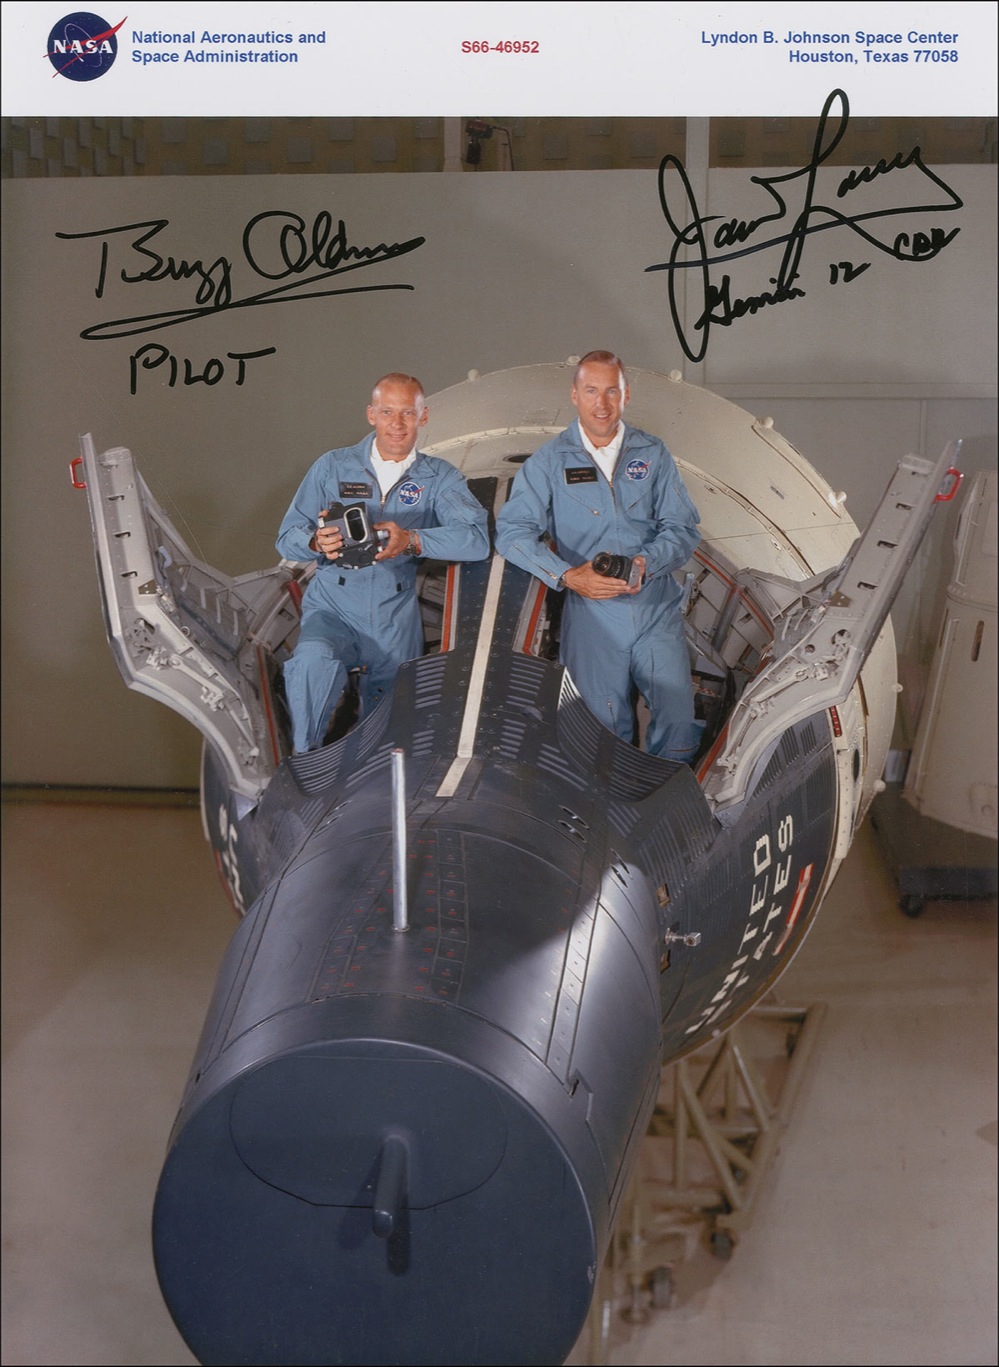 Lot #120 Buzz Aldrin and James Lovell